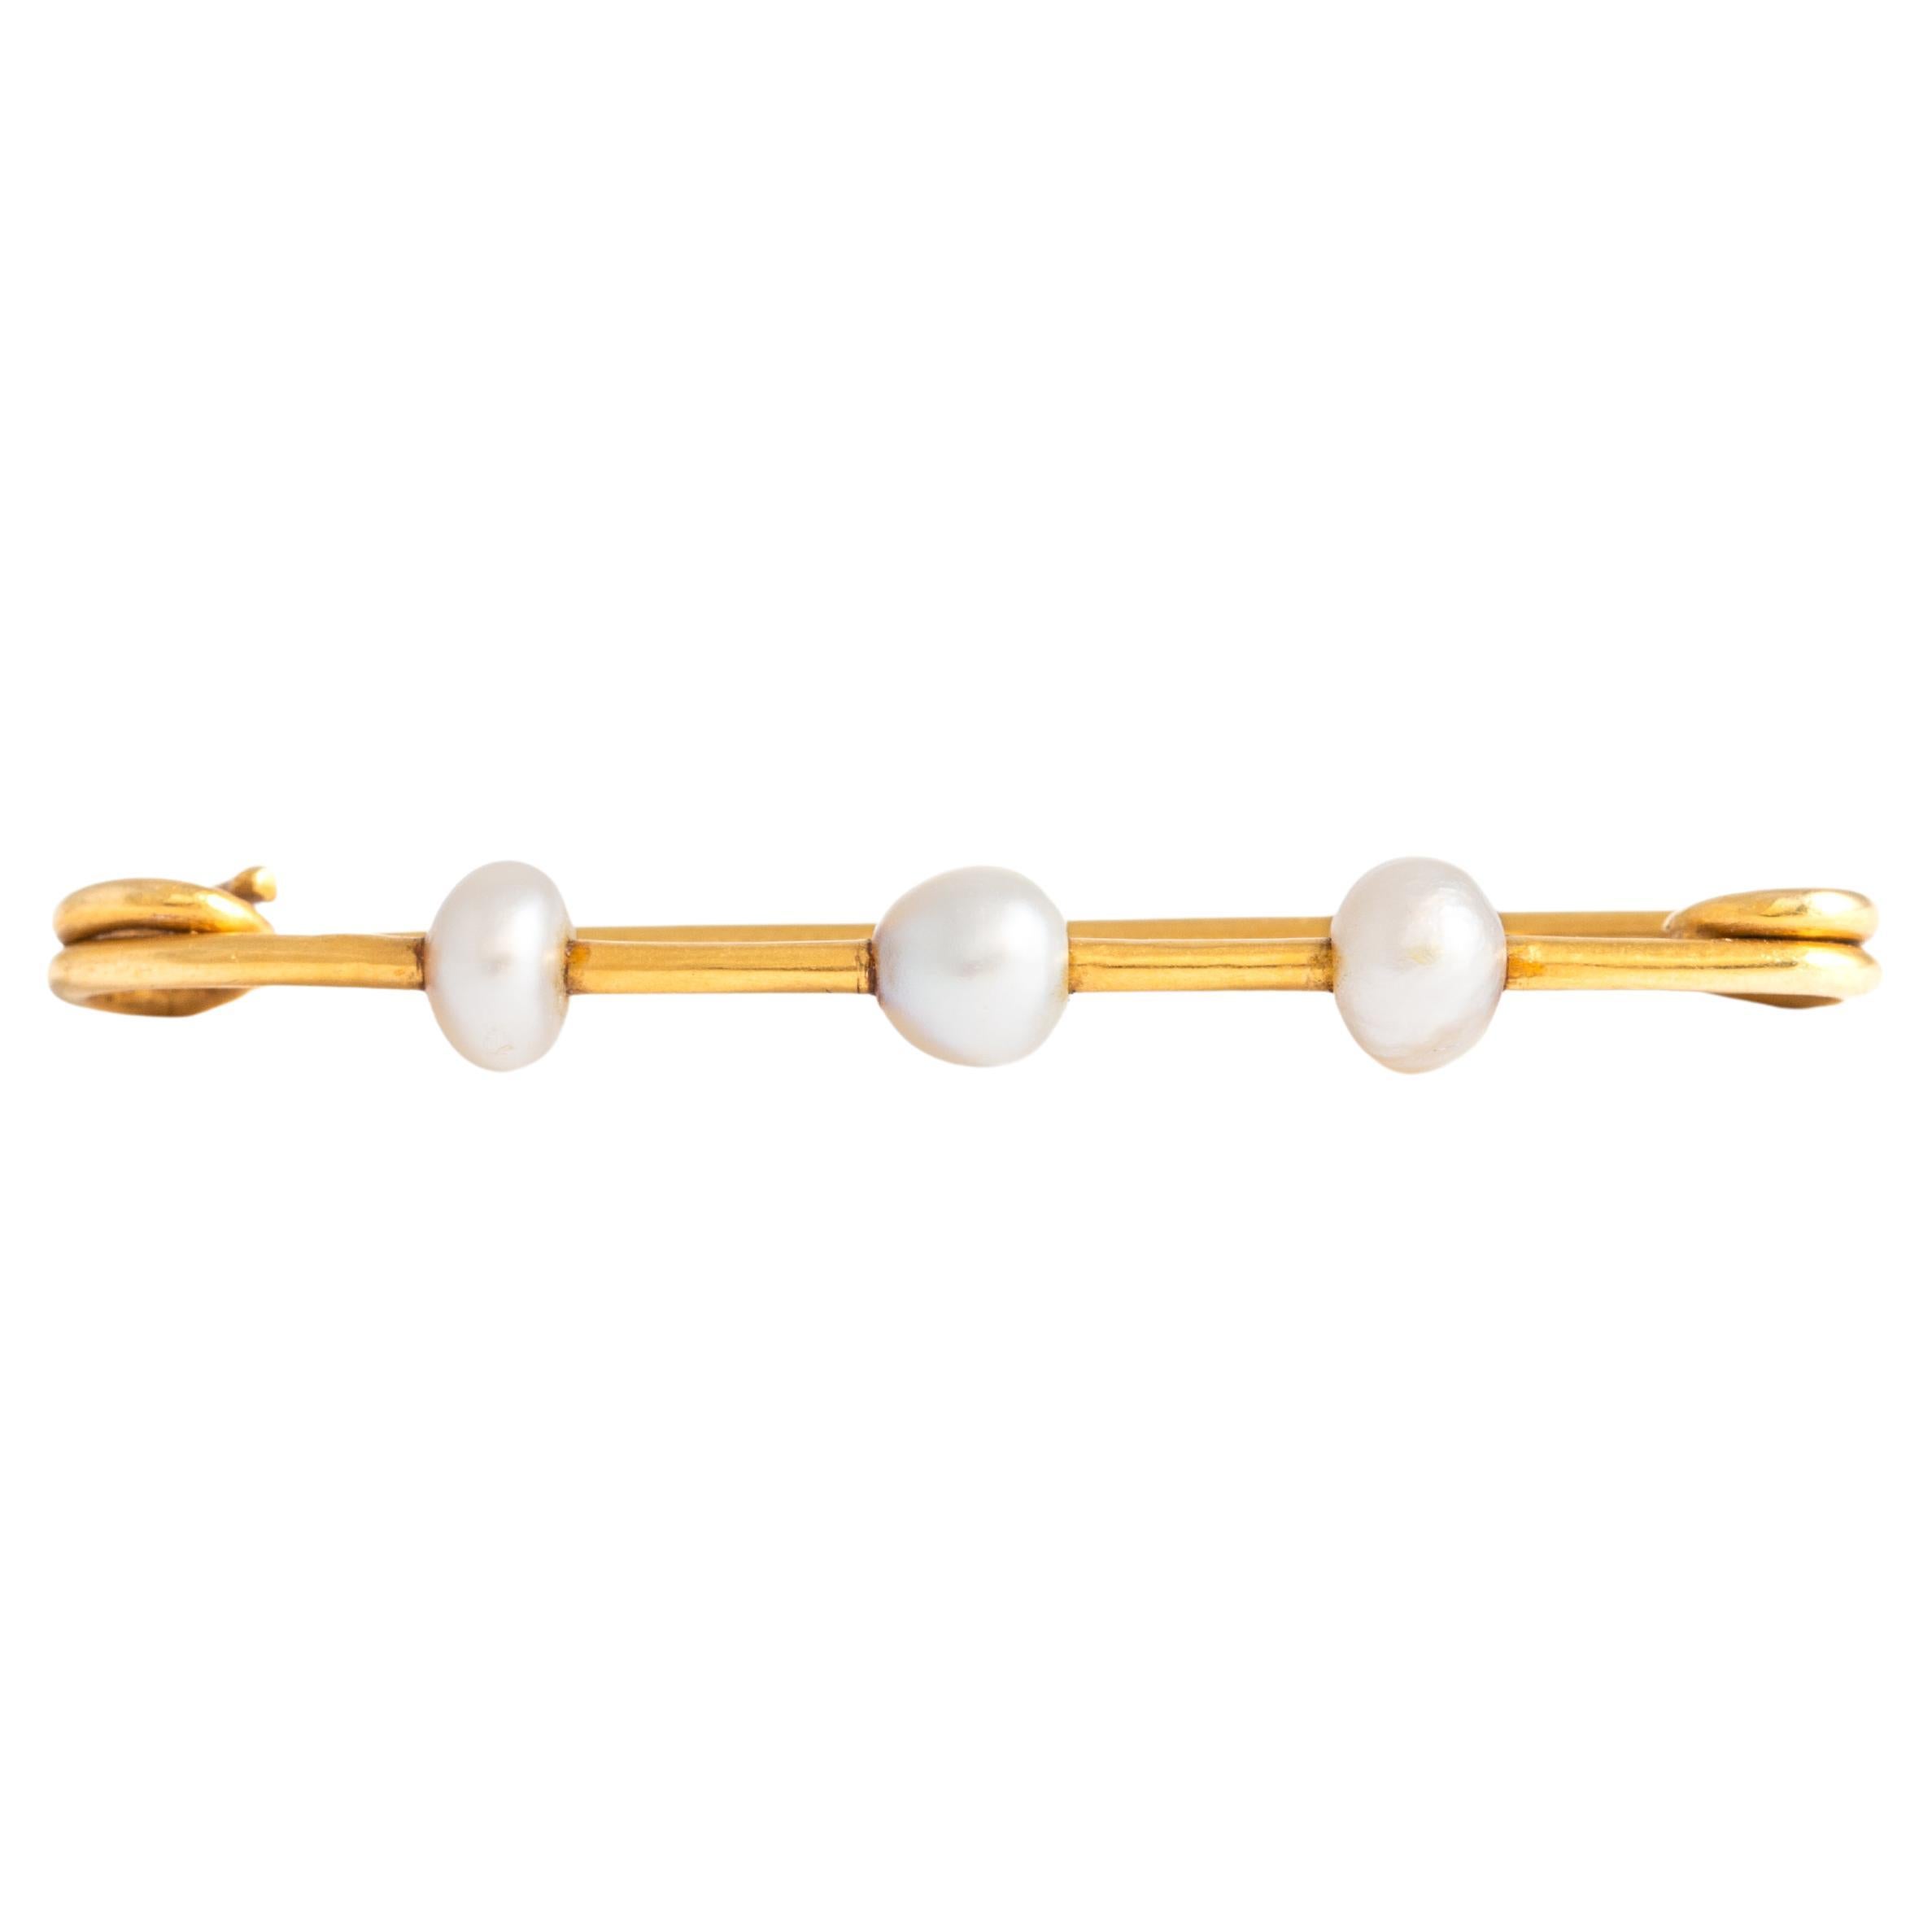 18K yellow gold brooch forming a safety pin with three cultured pearls.
Length: 4.20 centimeters. 
Gross weight: 2.40 grams.